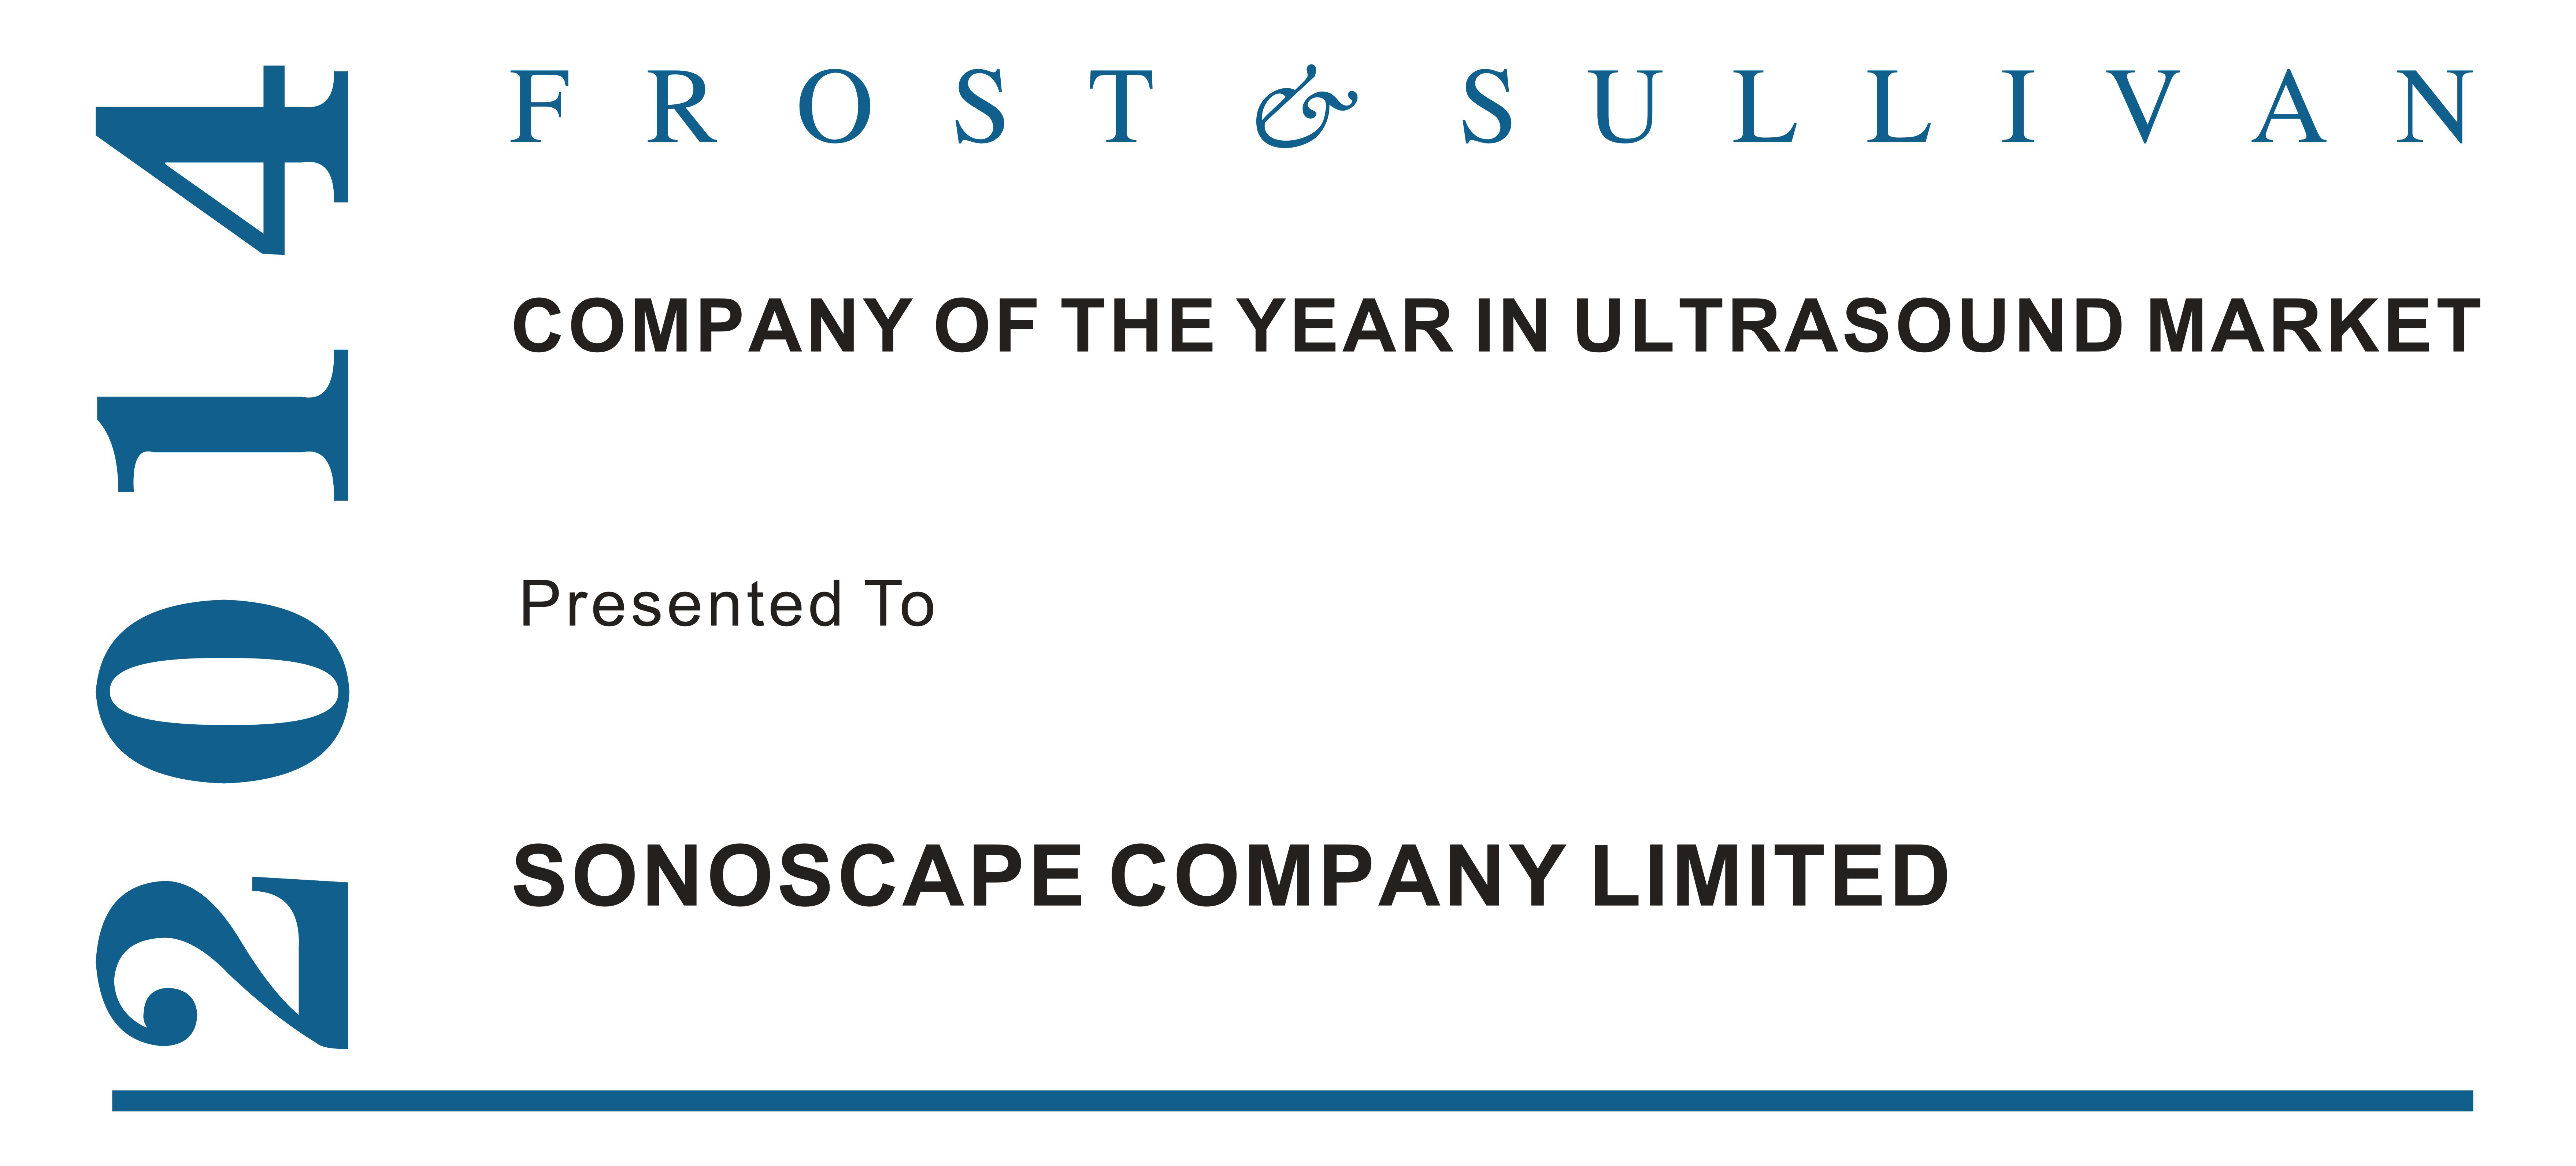 Received “Company Of The Year In Ultrasound Market 2014” from FROST & SULLIVAN